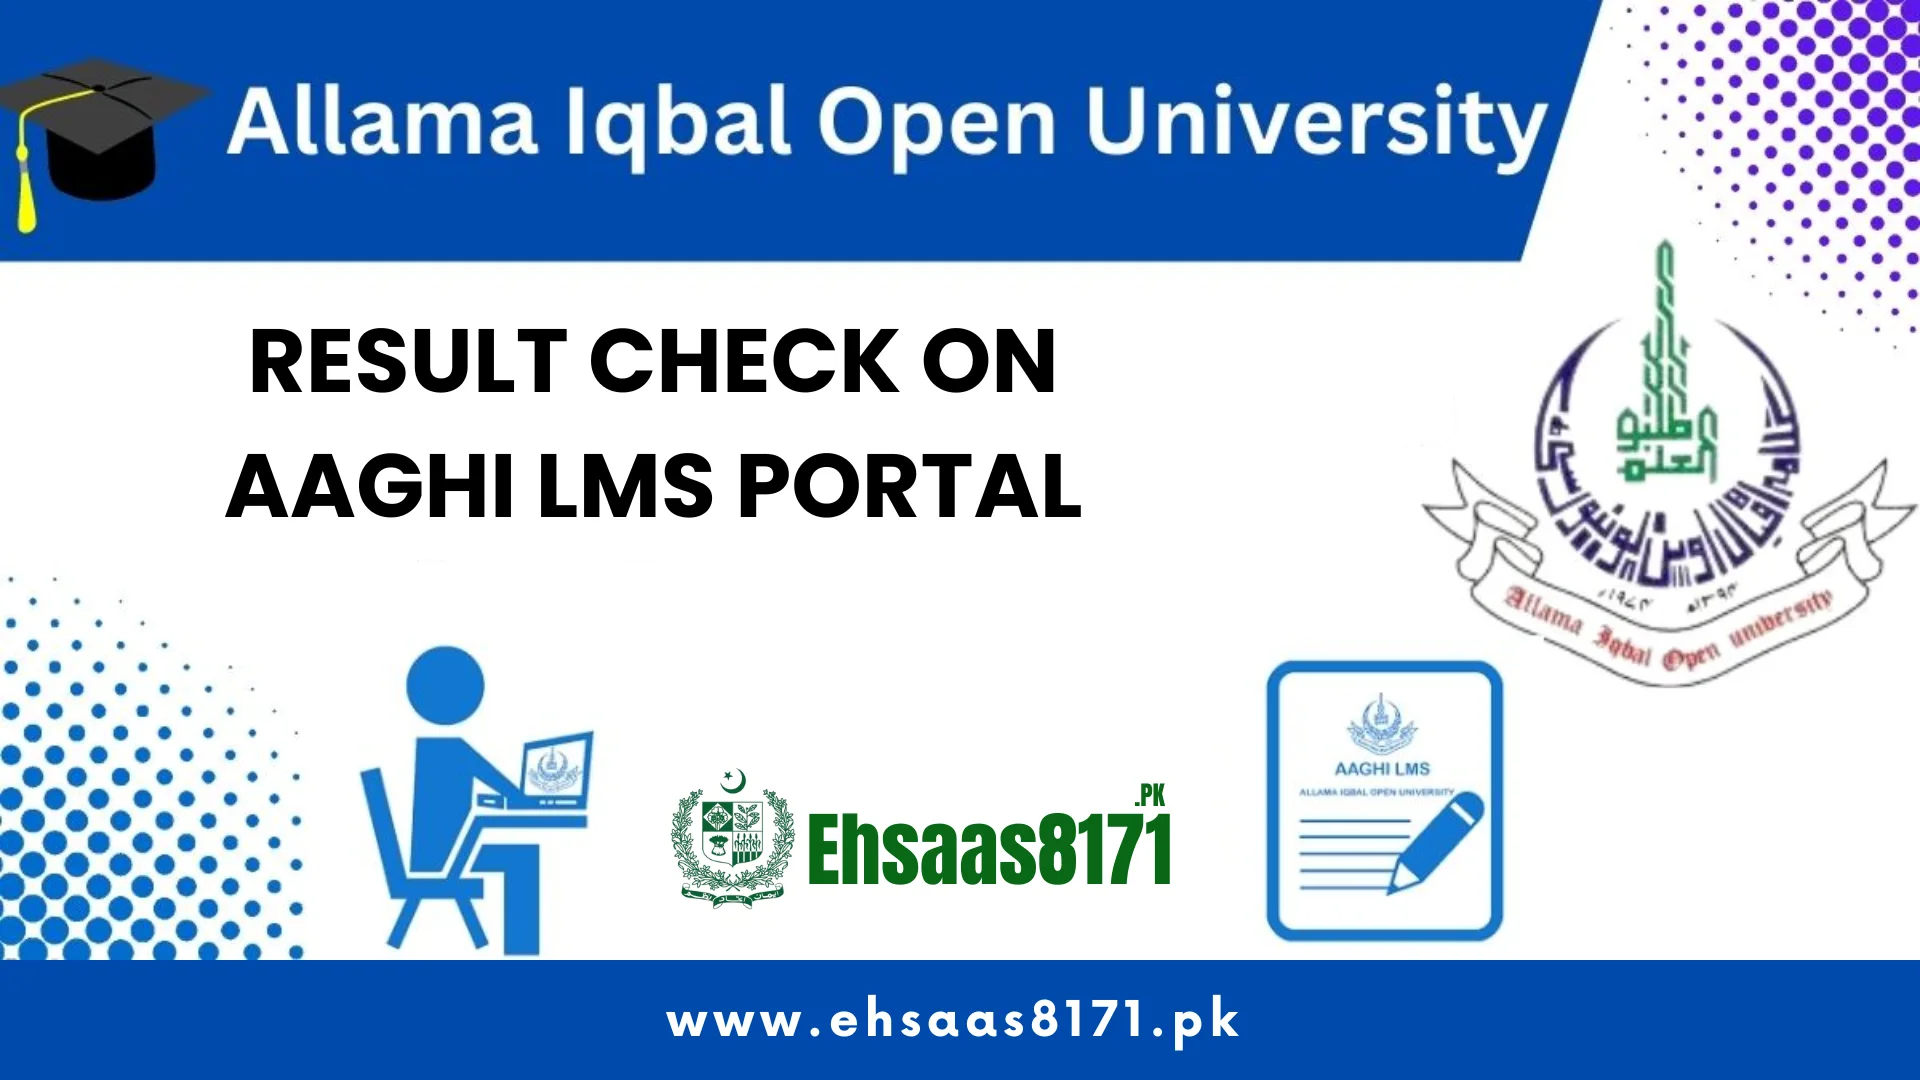 Result Check on AAGHI LMS Portal